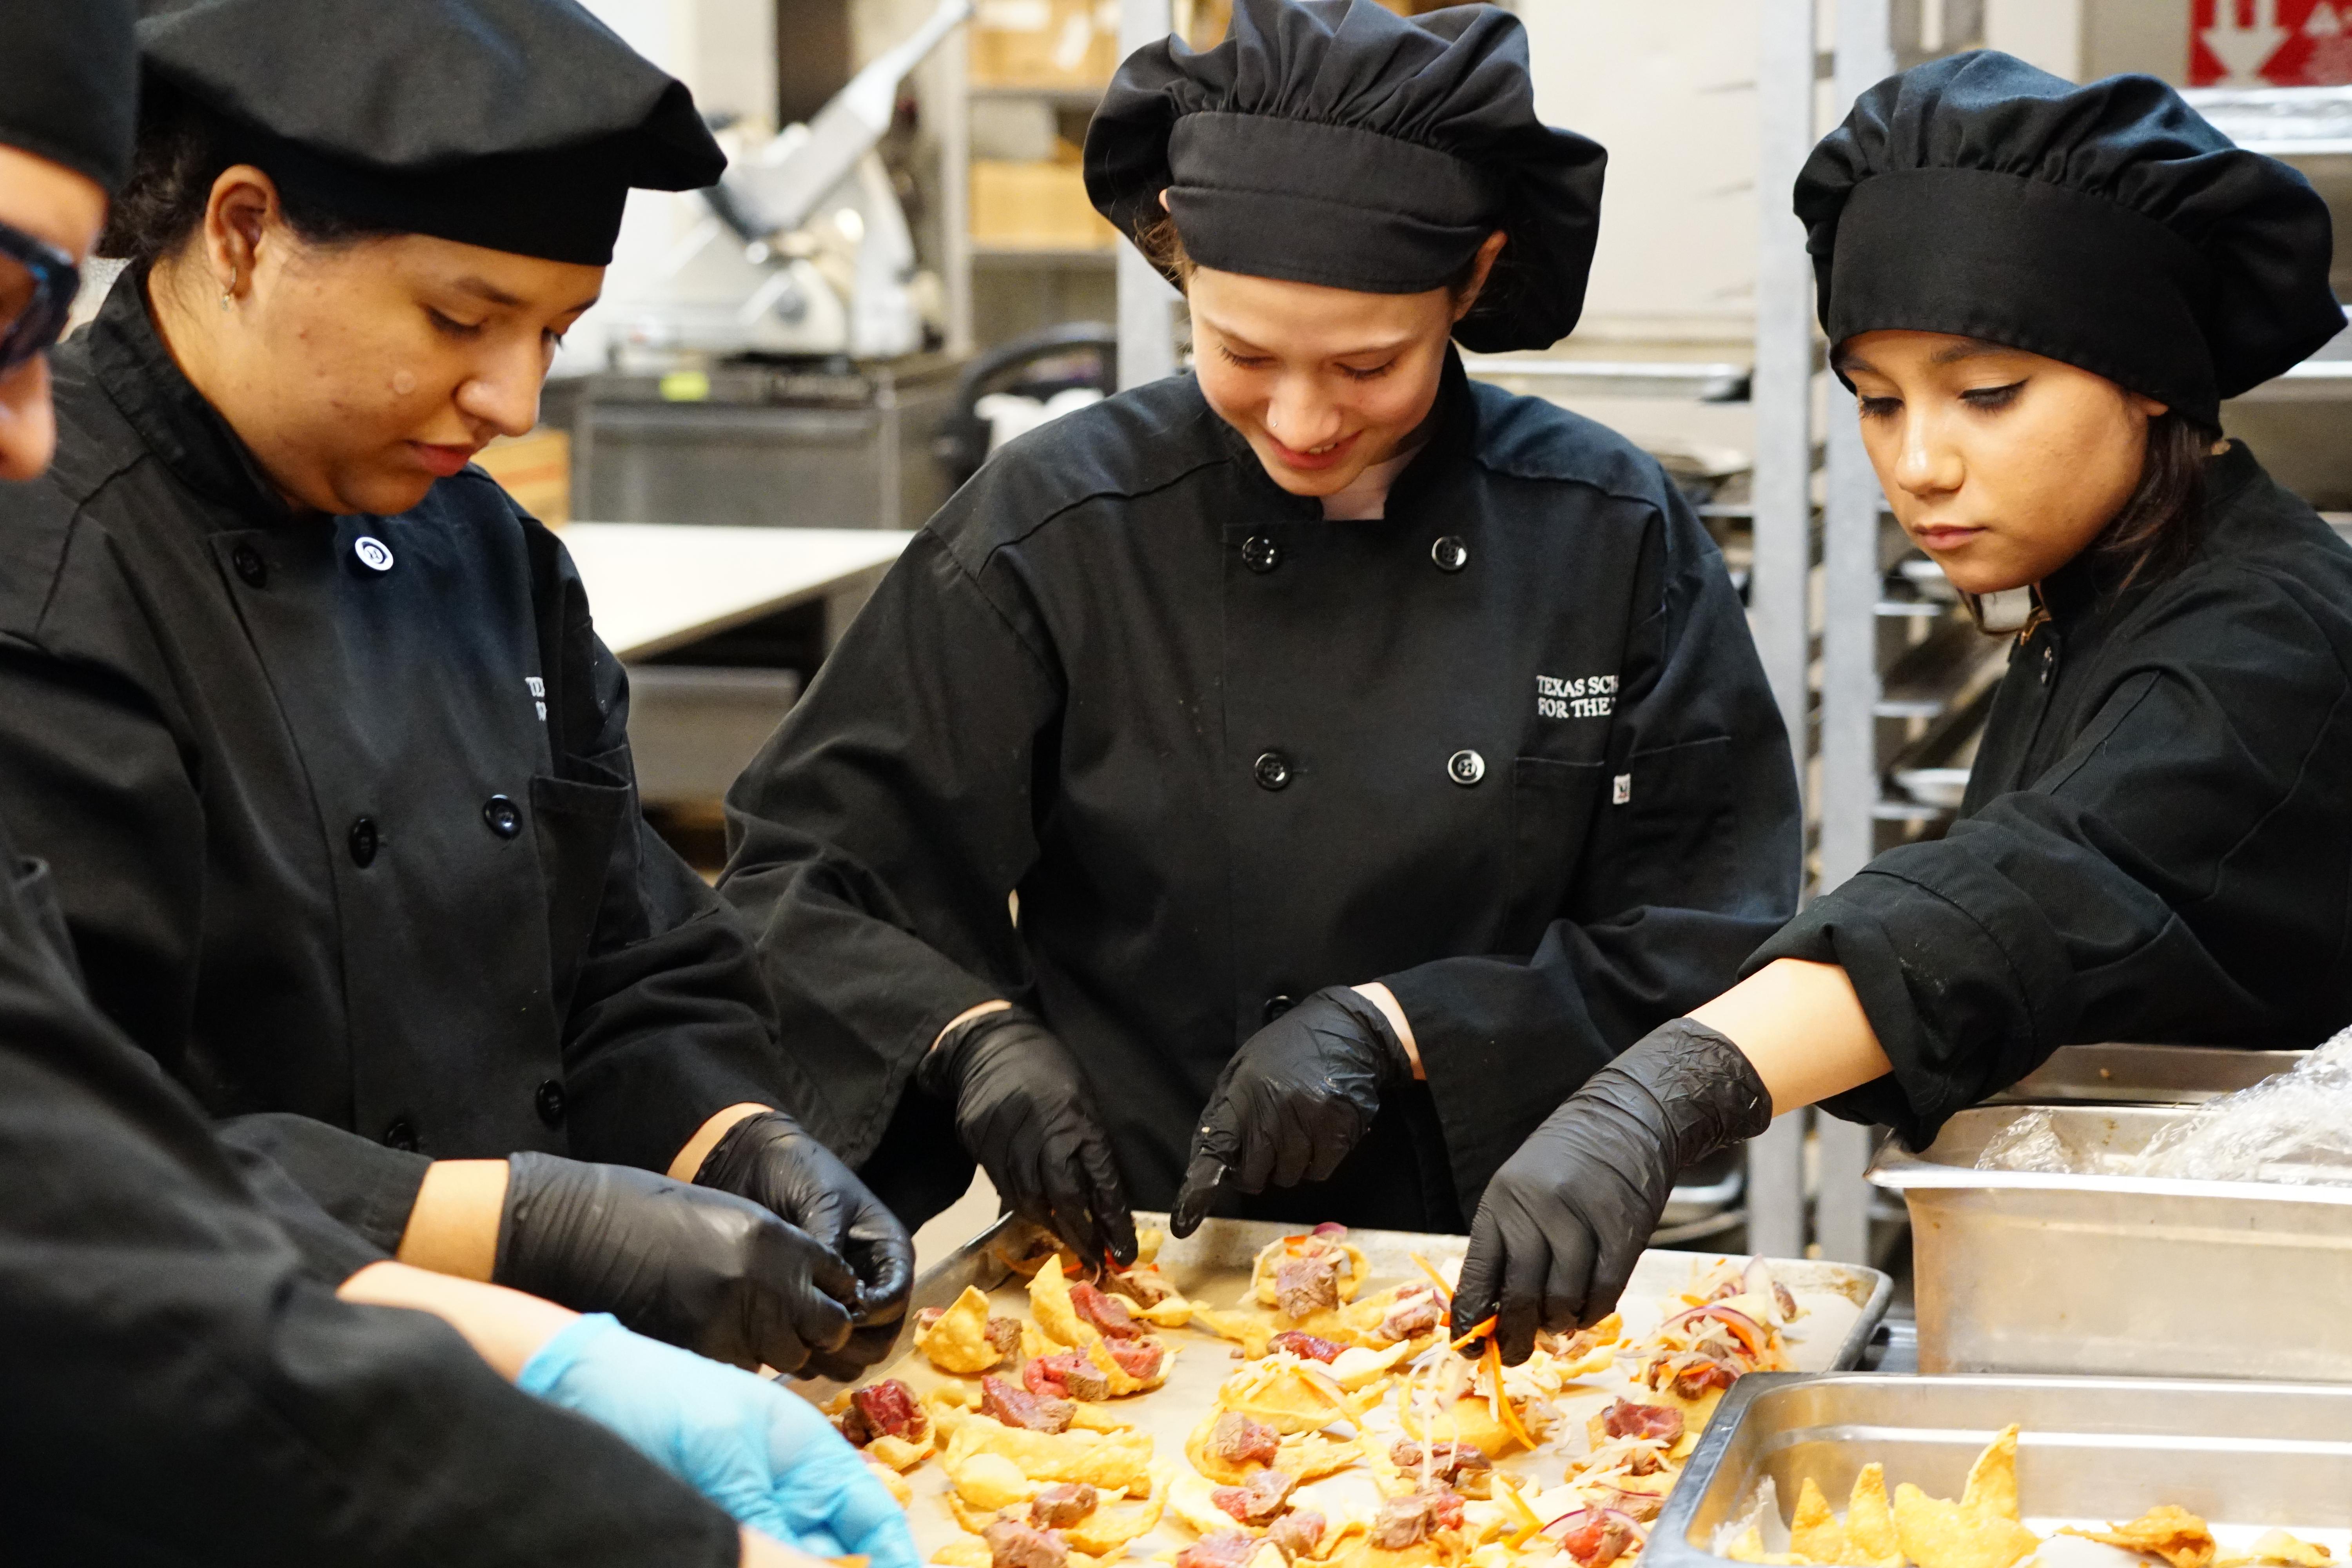 three culinary students with black chef hats and uniforms incorporating the appetizer meal for the Gala.